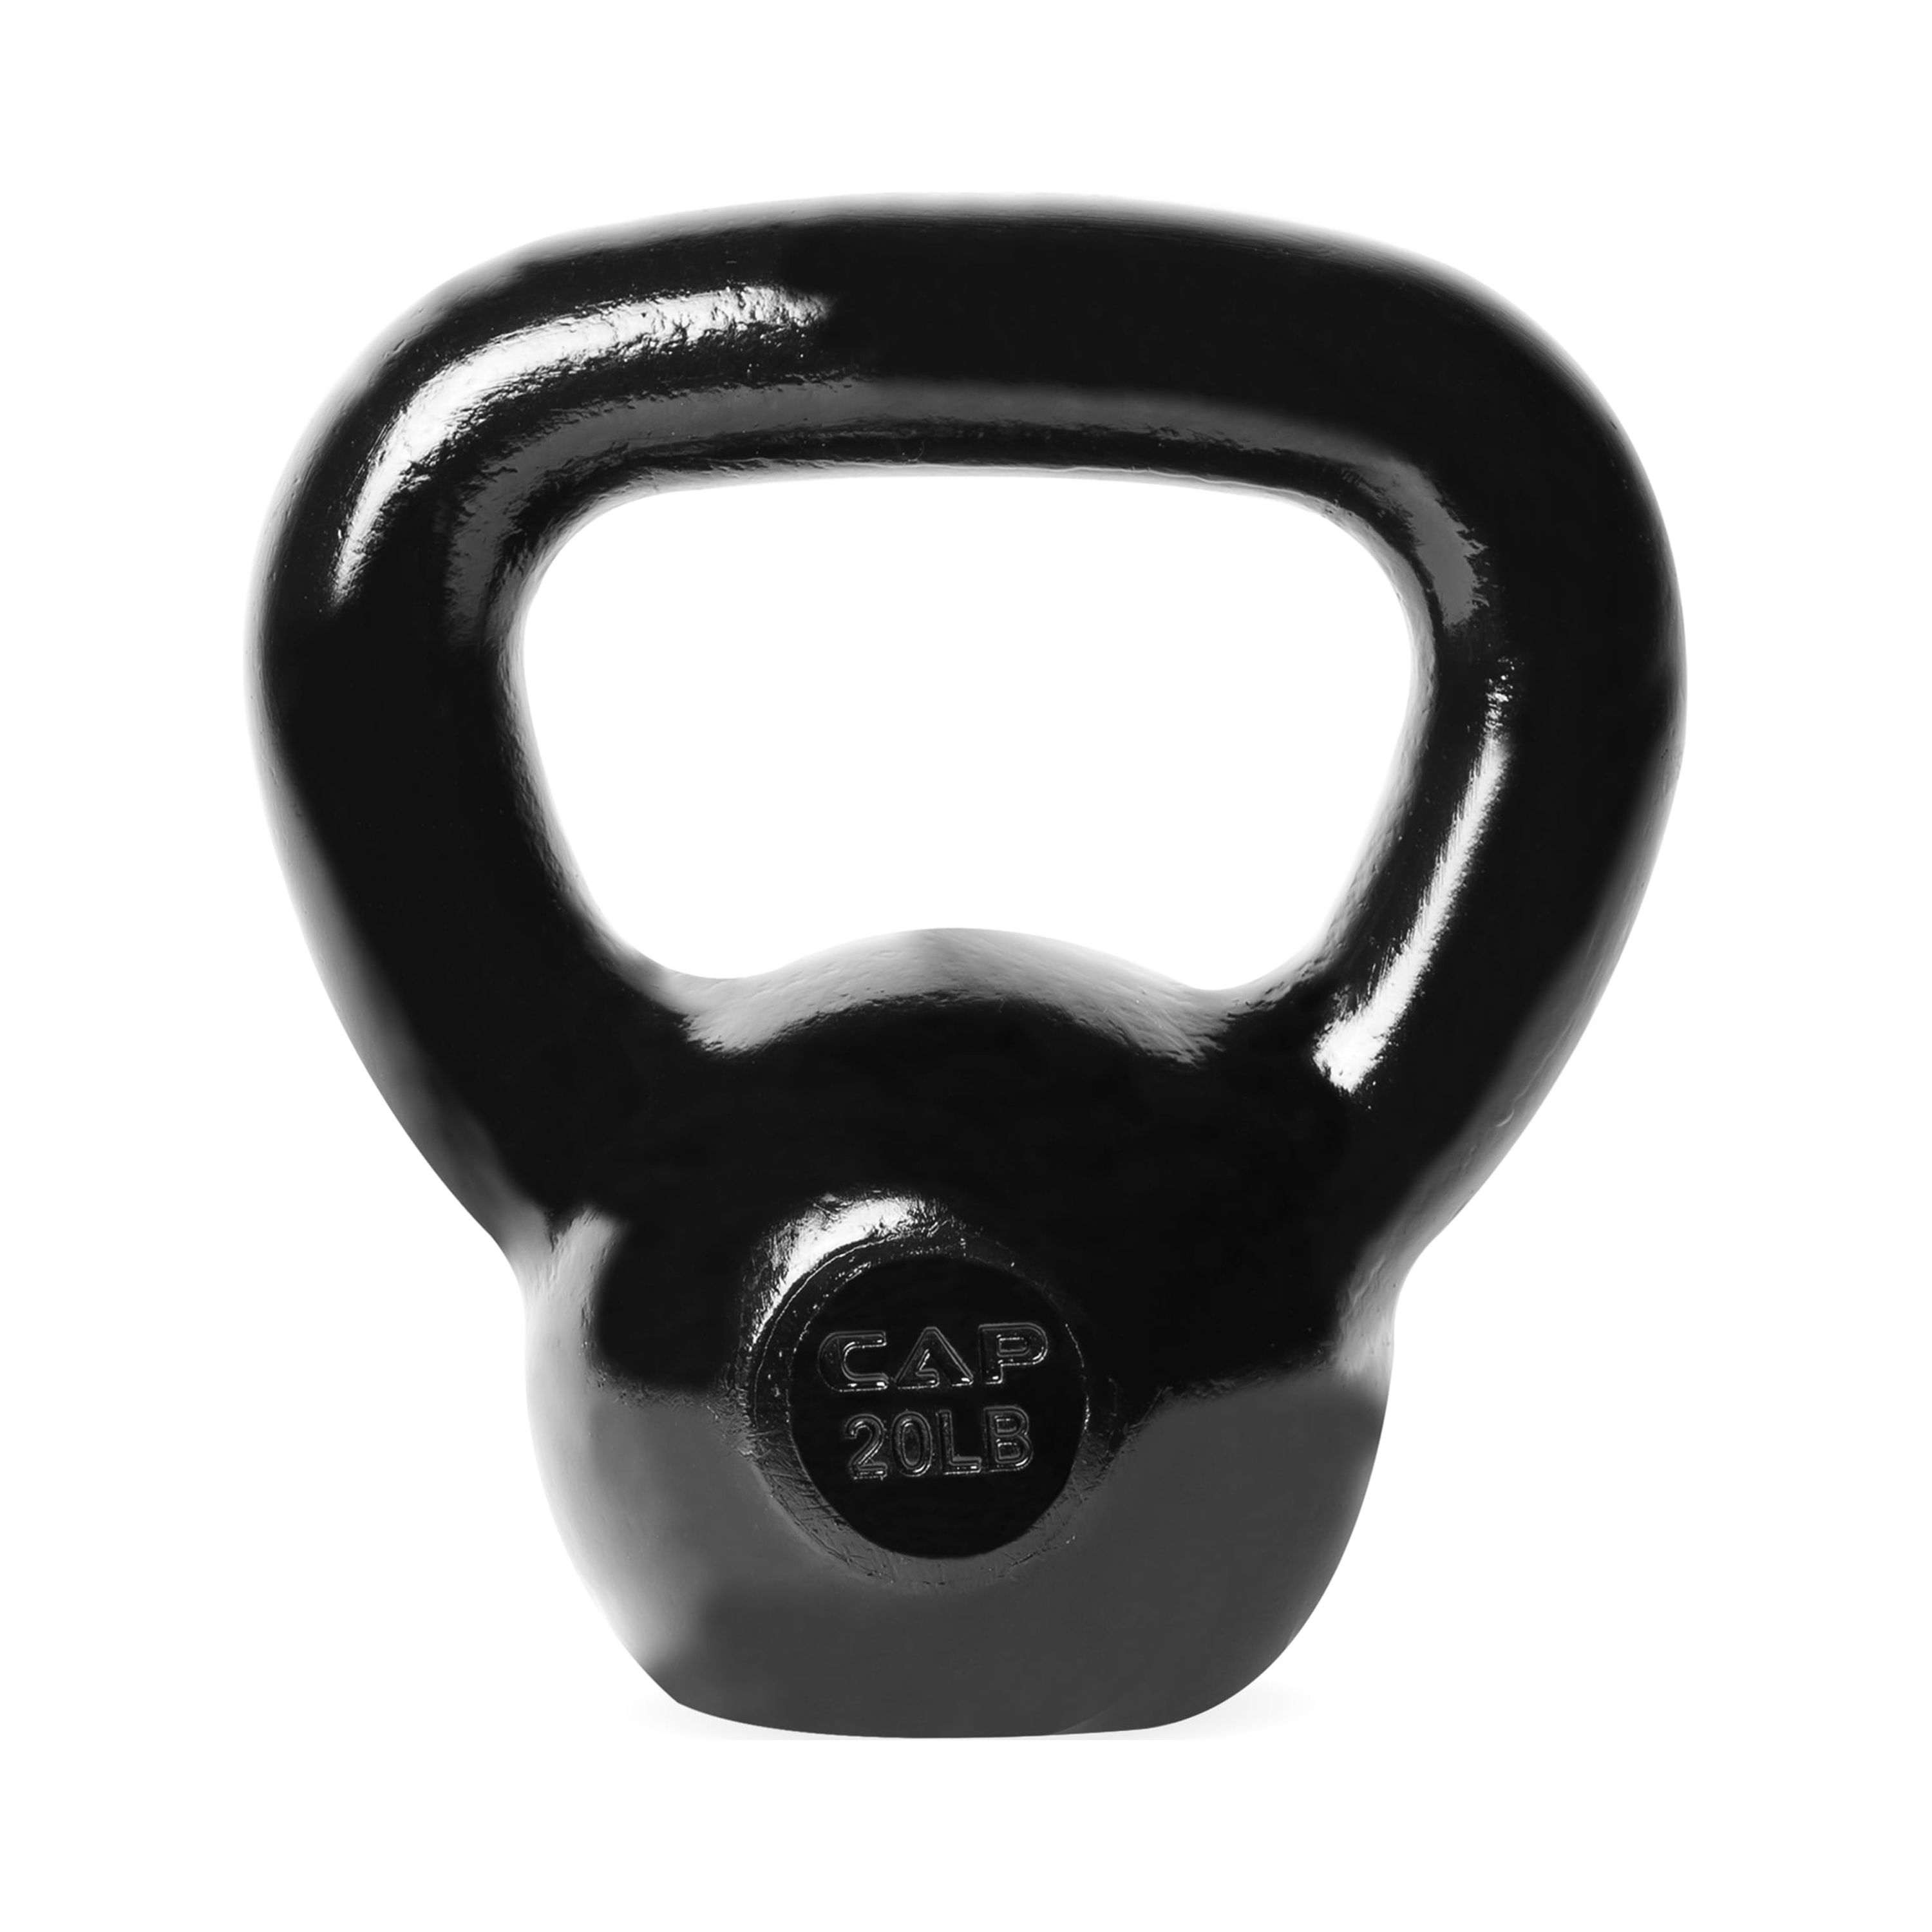 CAP Barbell Cast Iron Kettlebell, Black 20LBS - image 5 of 8